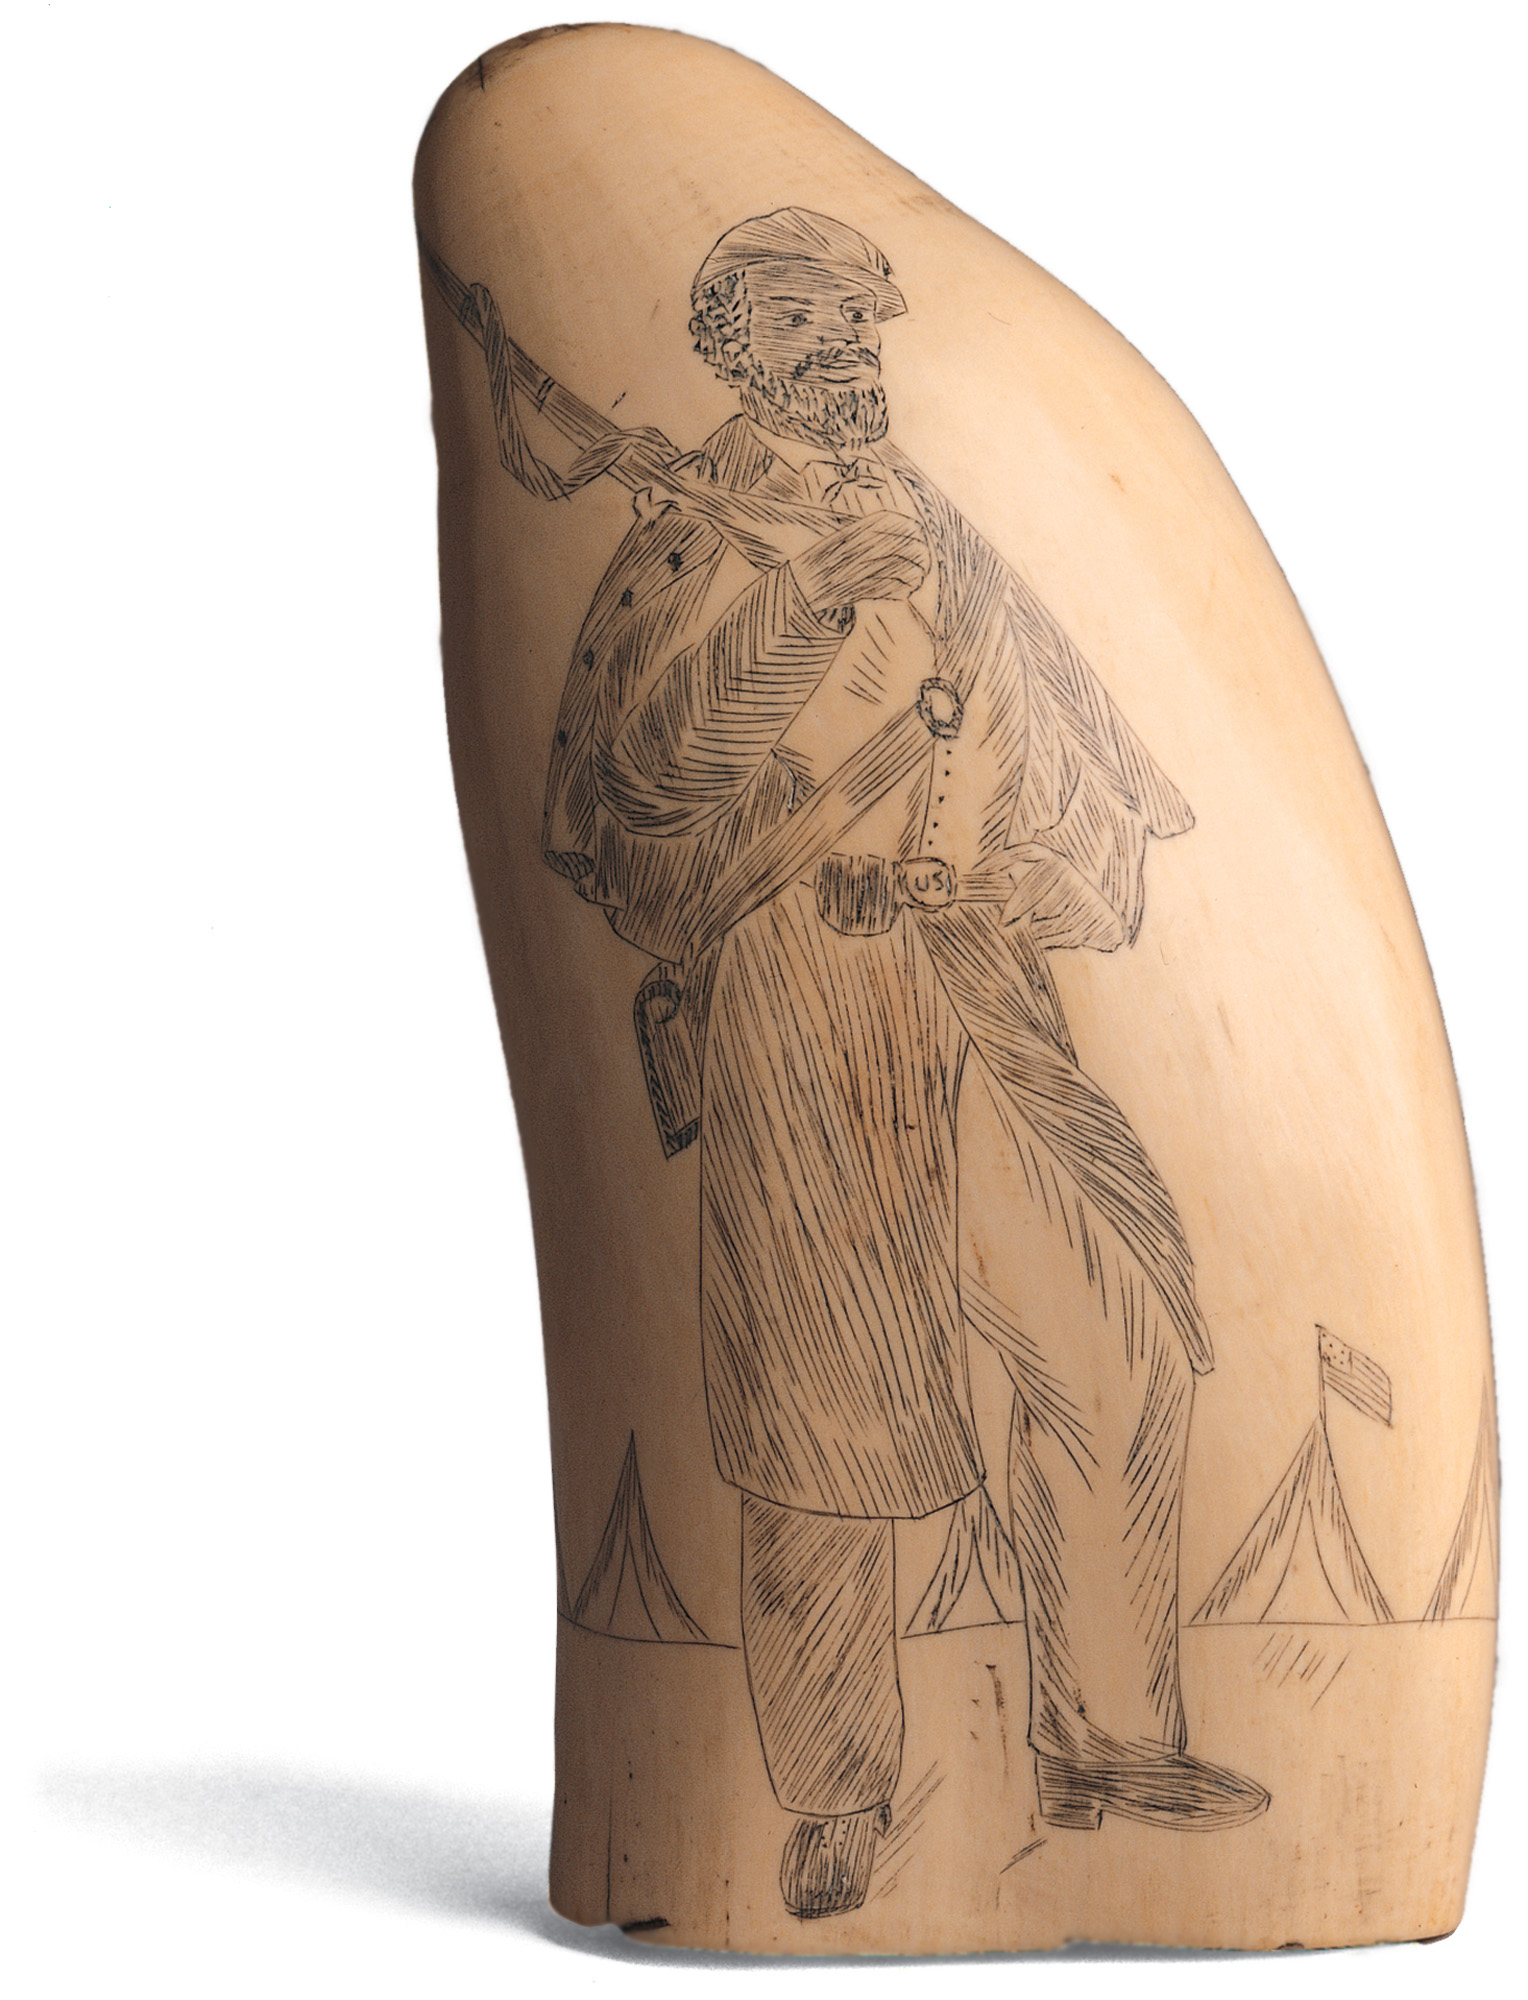 Scrimshaw with portrait of Black soldier, c. 1863, inscription on whale-tooth, 5 x 2 1/2 inches (Chicago History Museum)